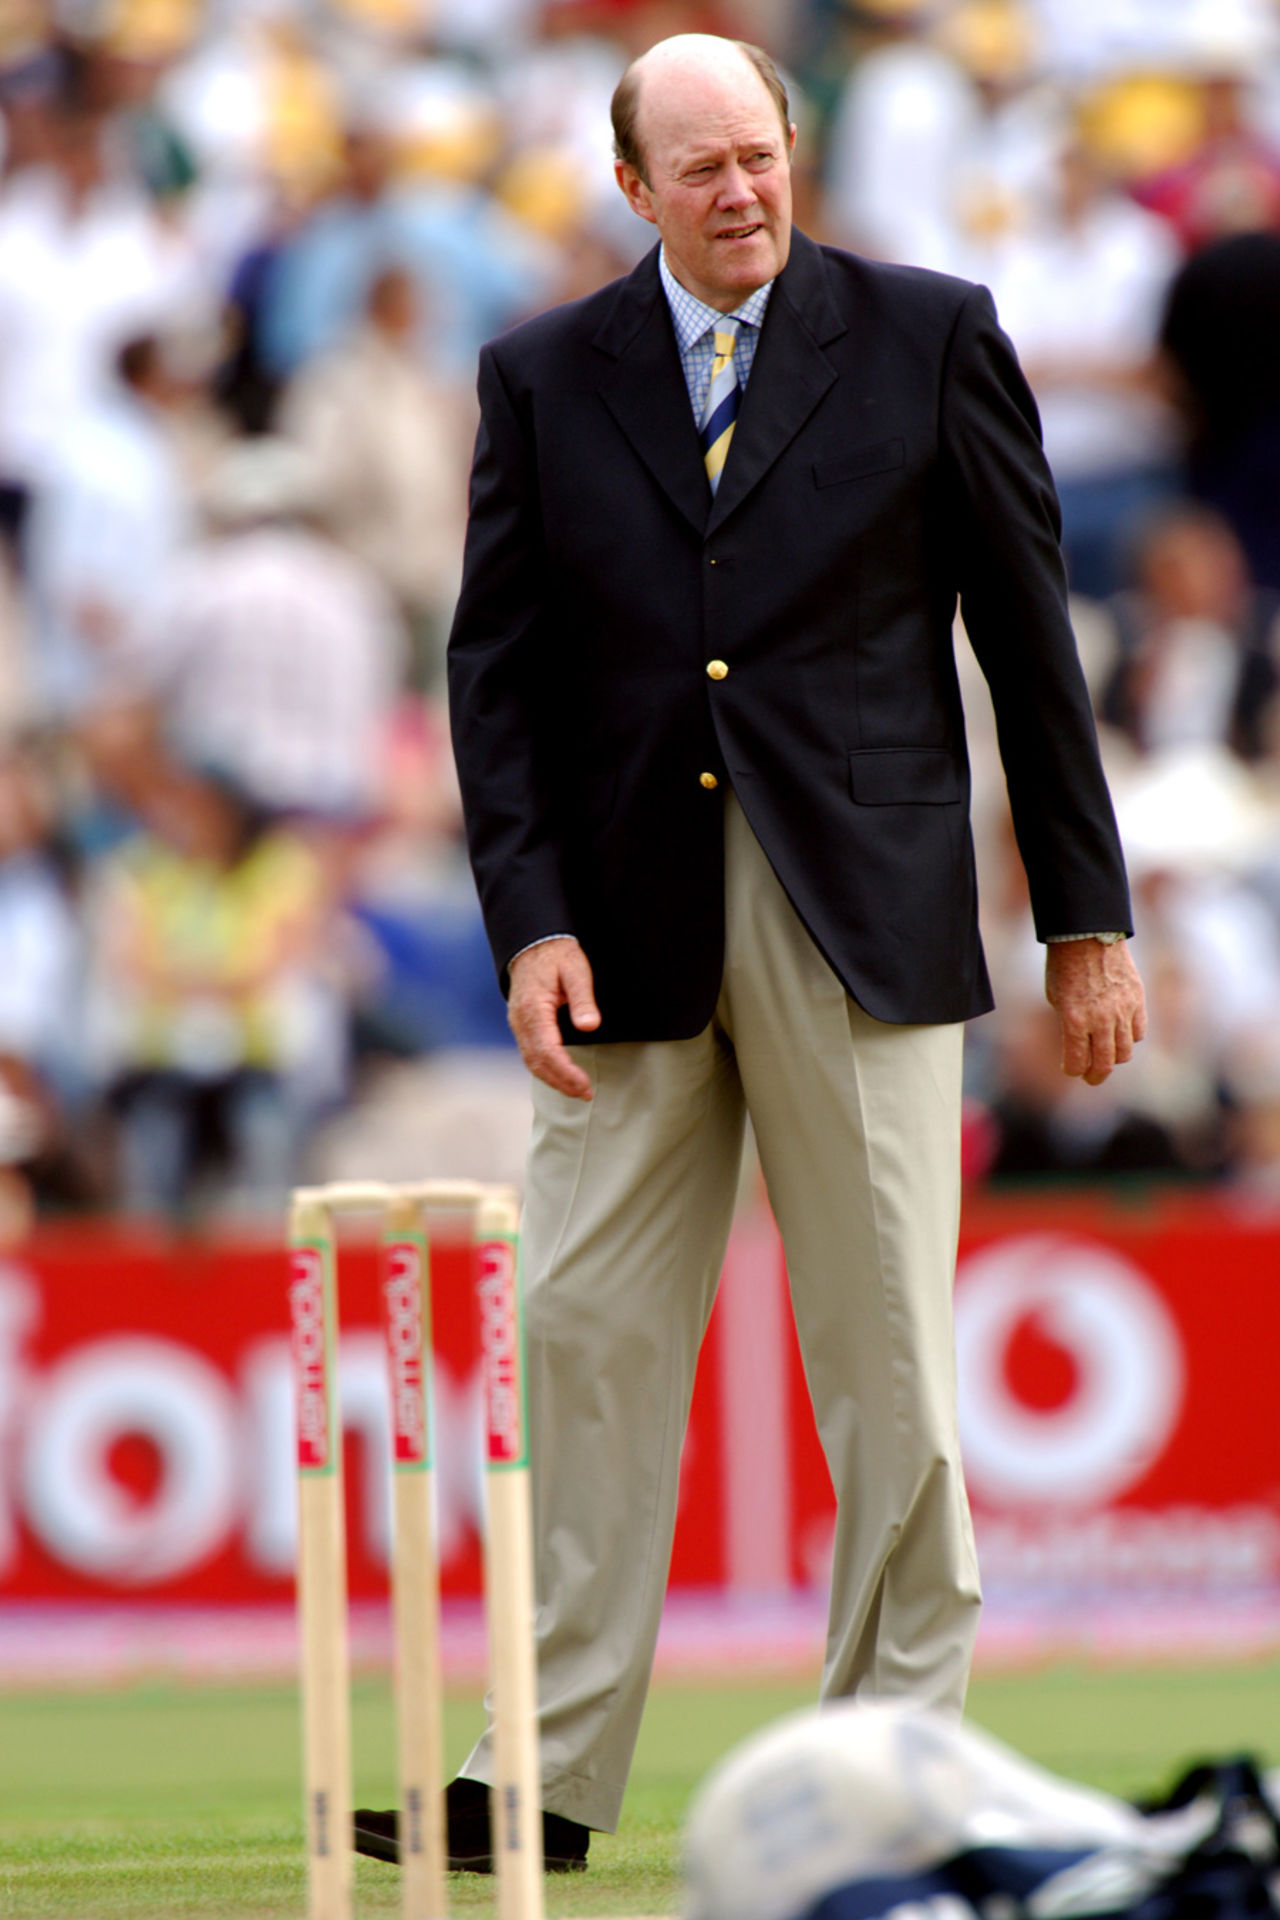 Tony Greig on the pitch before the start of play, England v Australia, 2nd Test, Old Trafford, 1st day, August 11, 2005